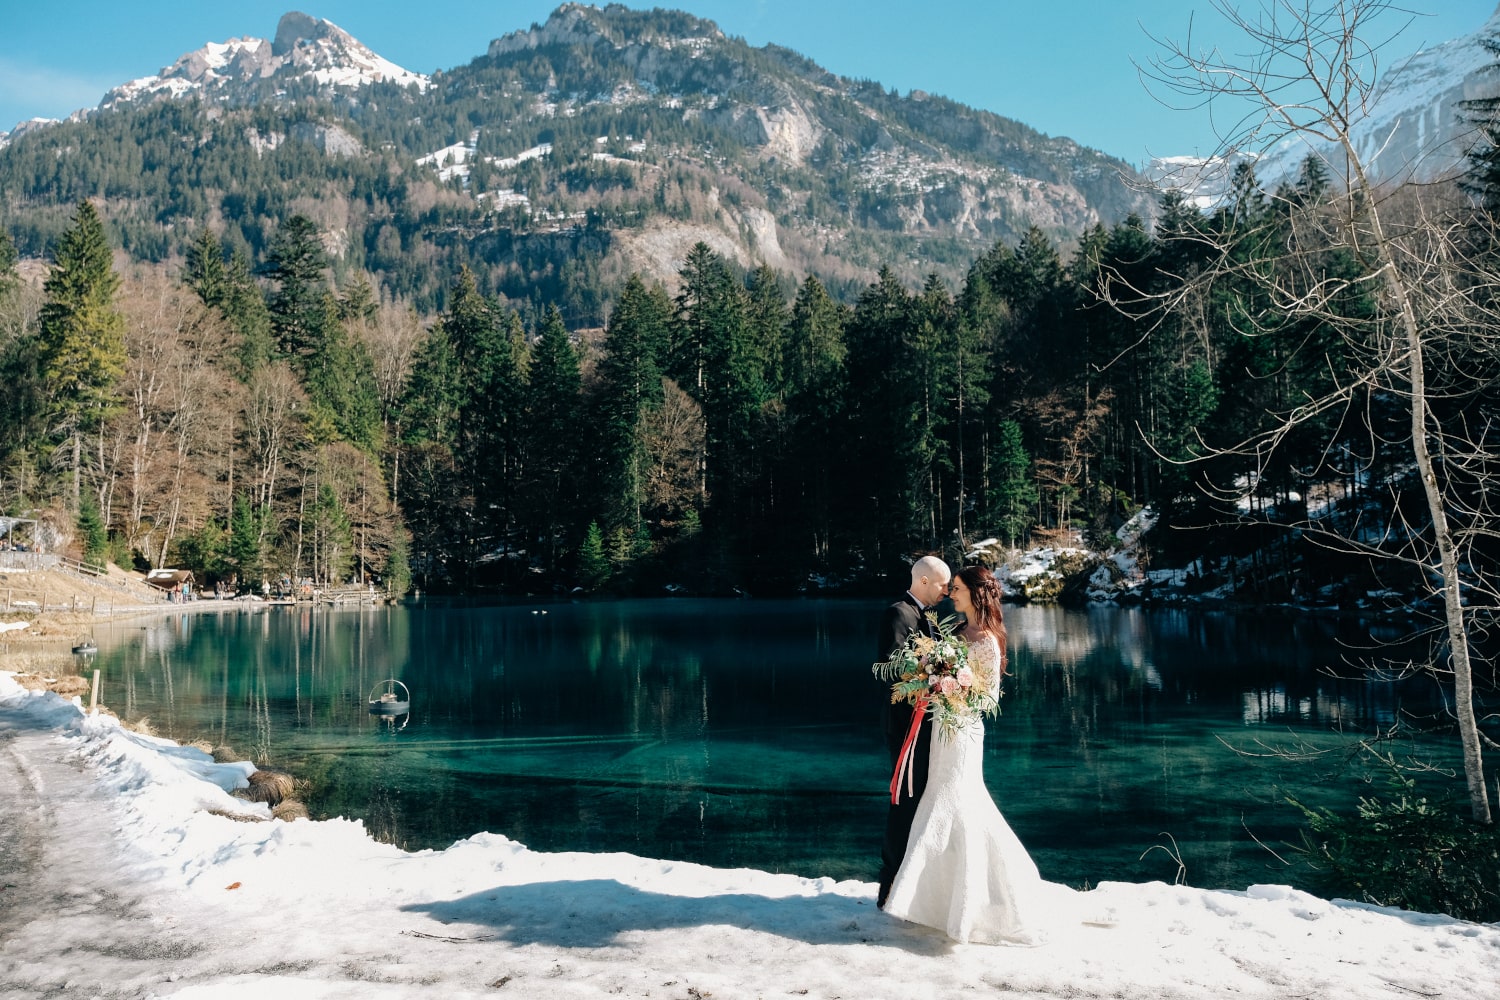 Finding the right celebrant in Switzerland